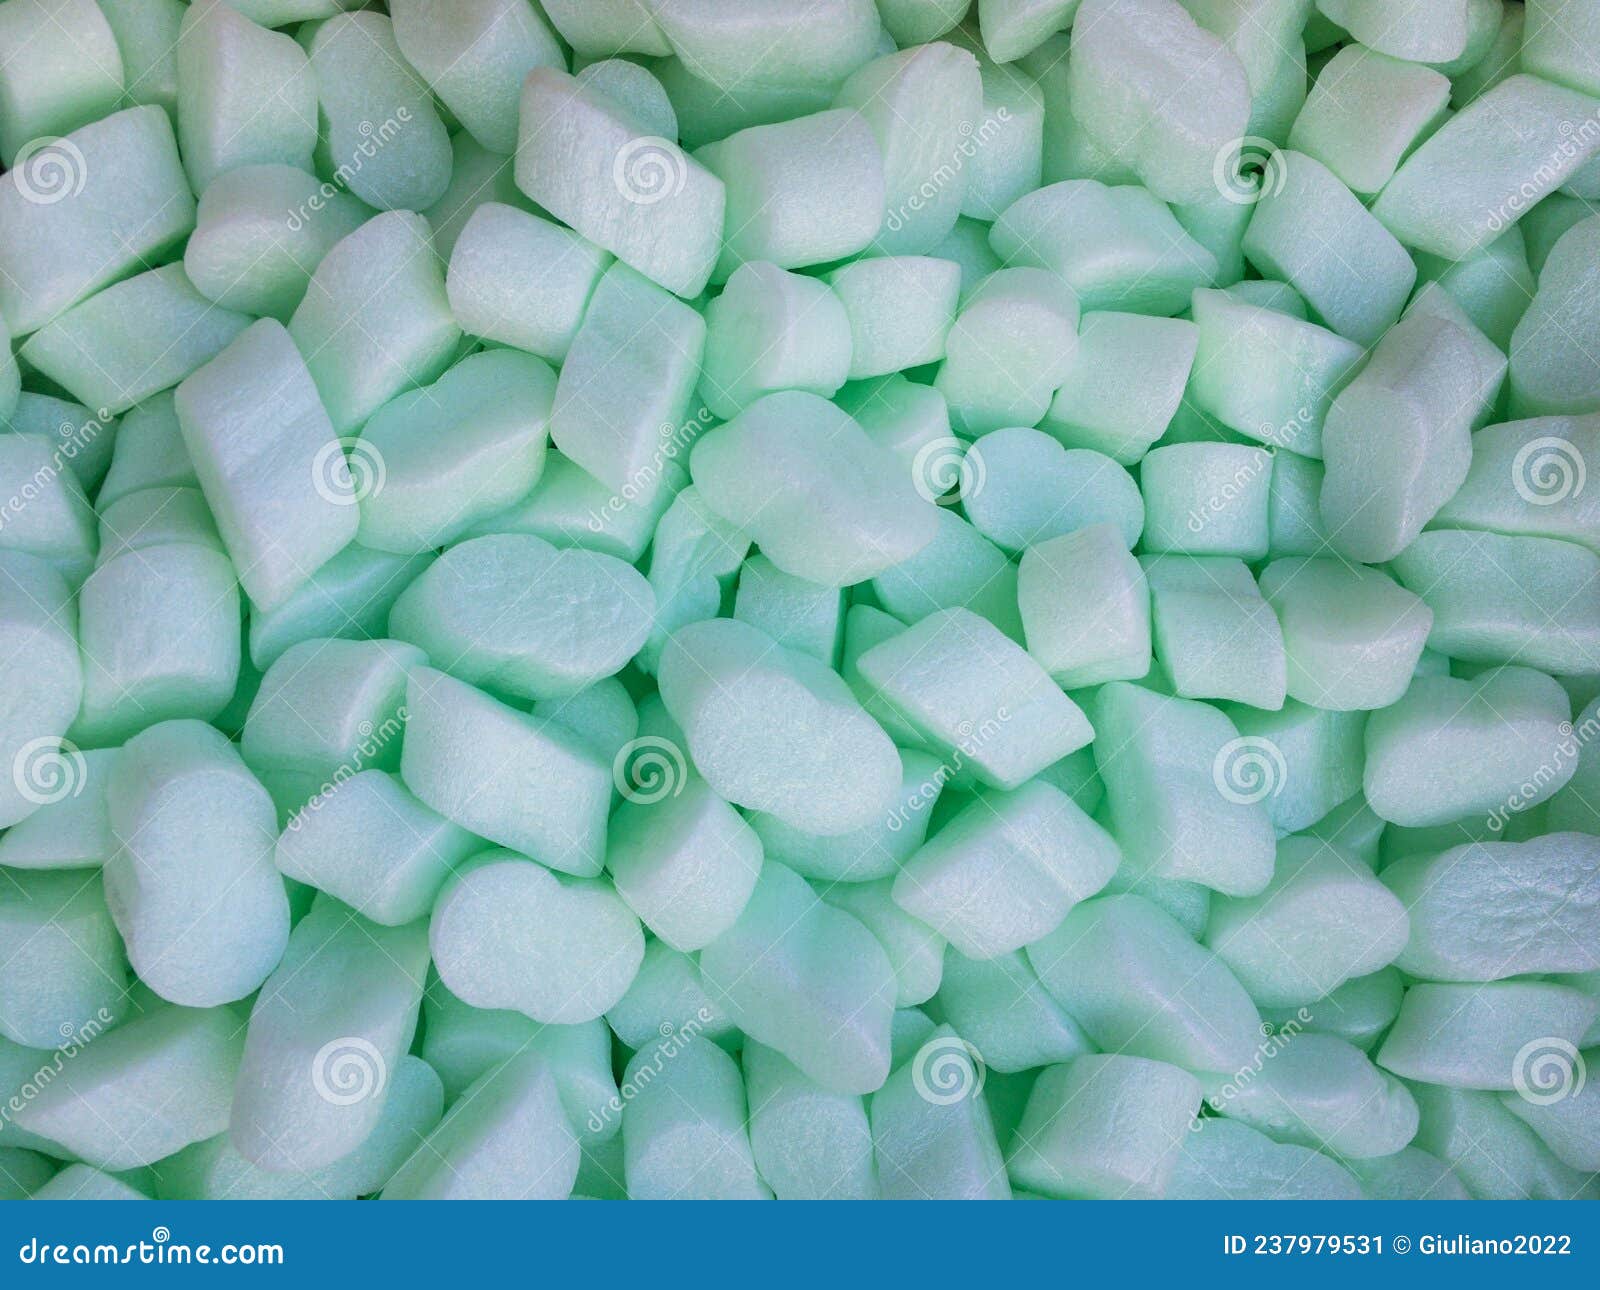 https://thumbs.dreamstime.com/z/polystyrene-chips-polystyrene-foam-chips-colored-green-used-as-infill-material-packaging-237979531.jpg